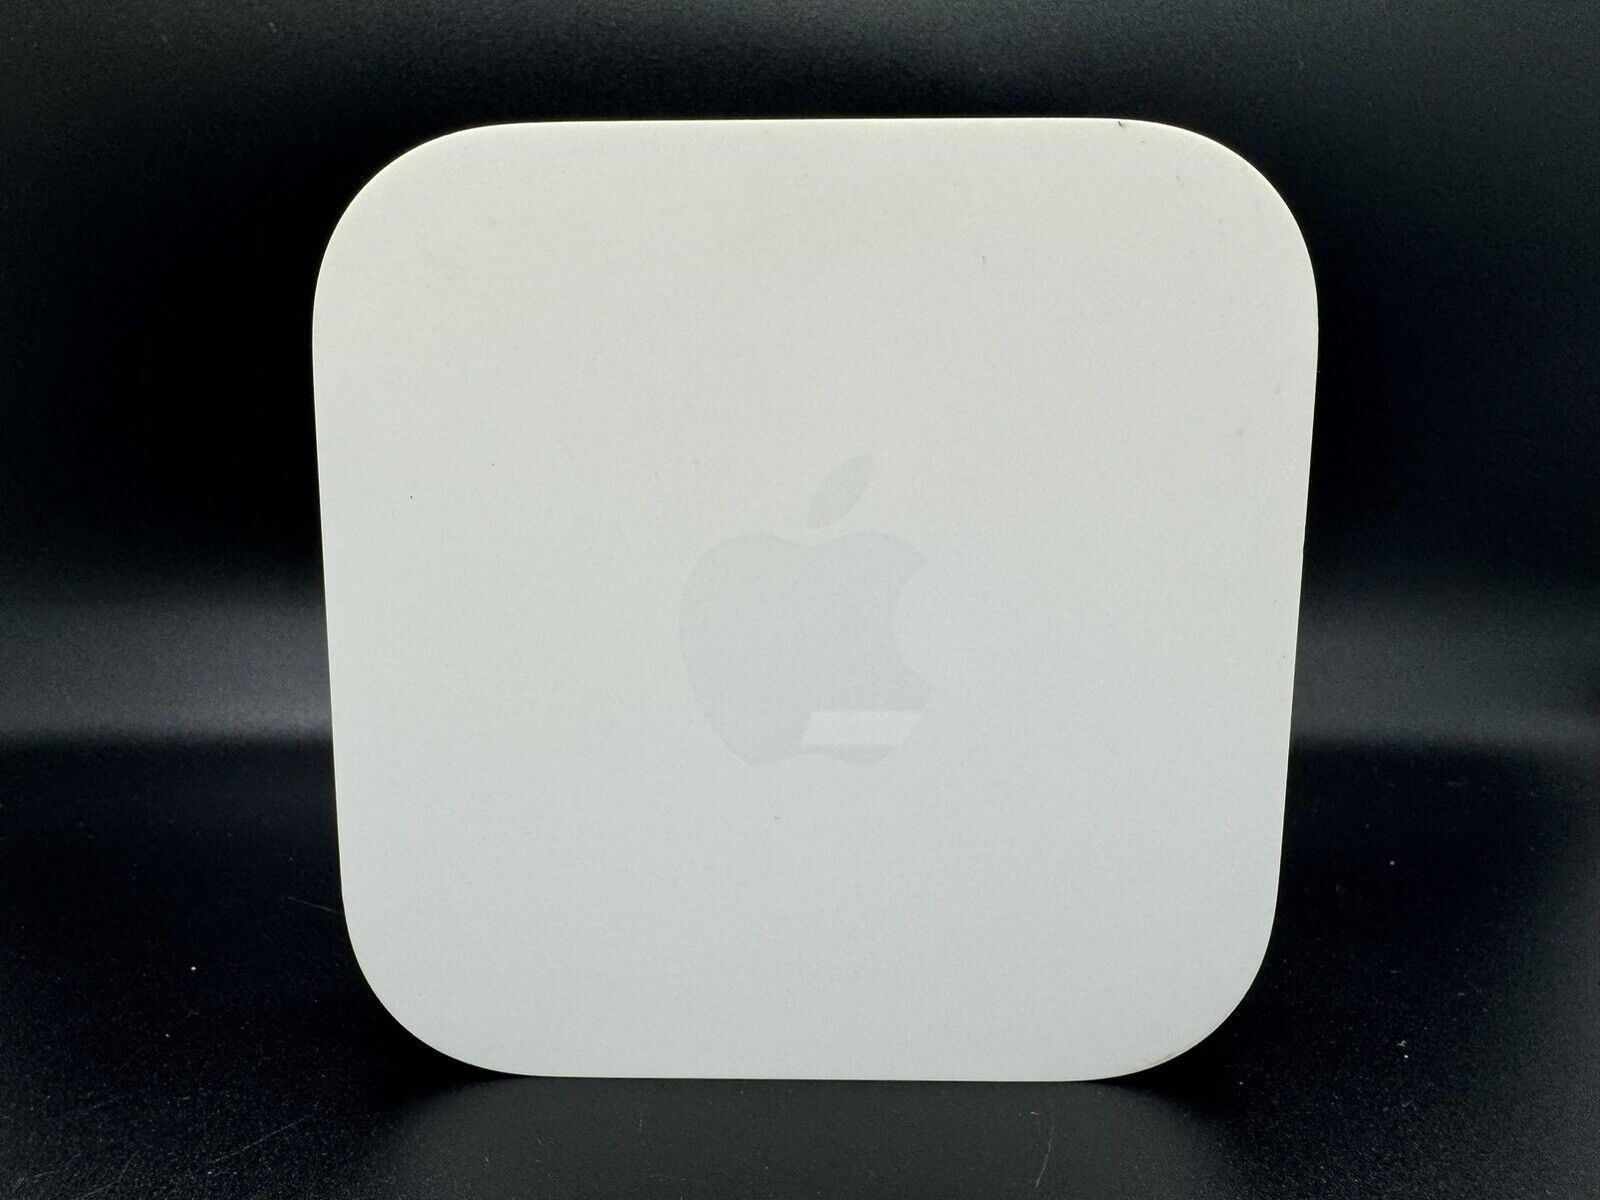 Apple A1392 Airport Express 2nd Generation Dualband 802.11n WiFi Router + Cable